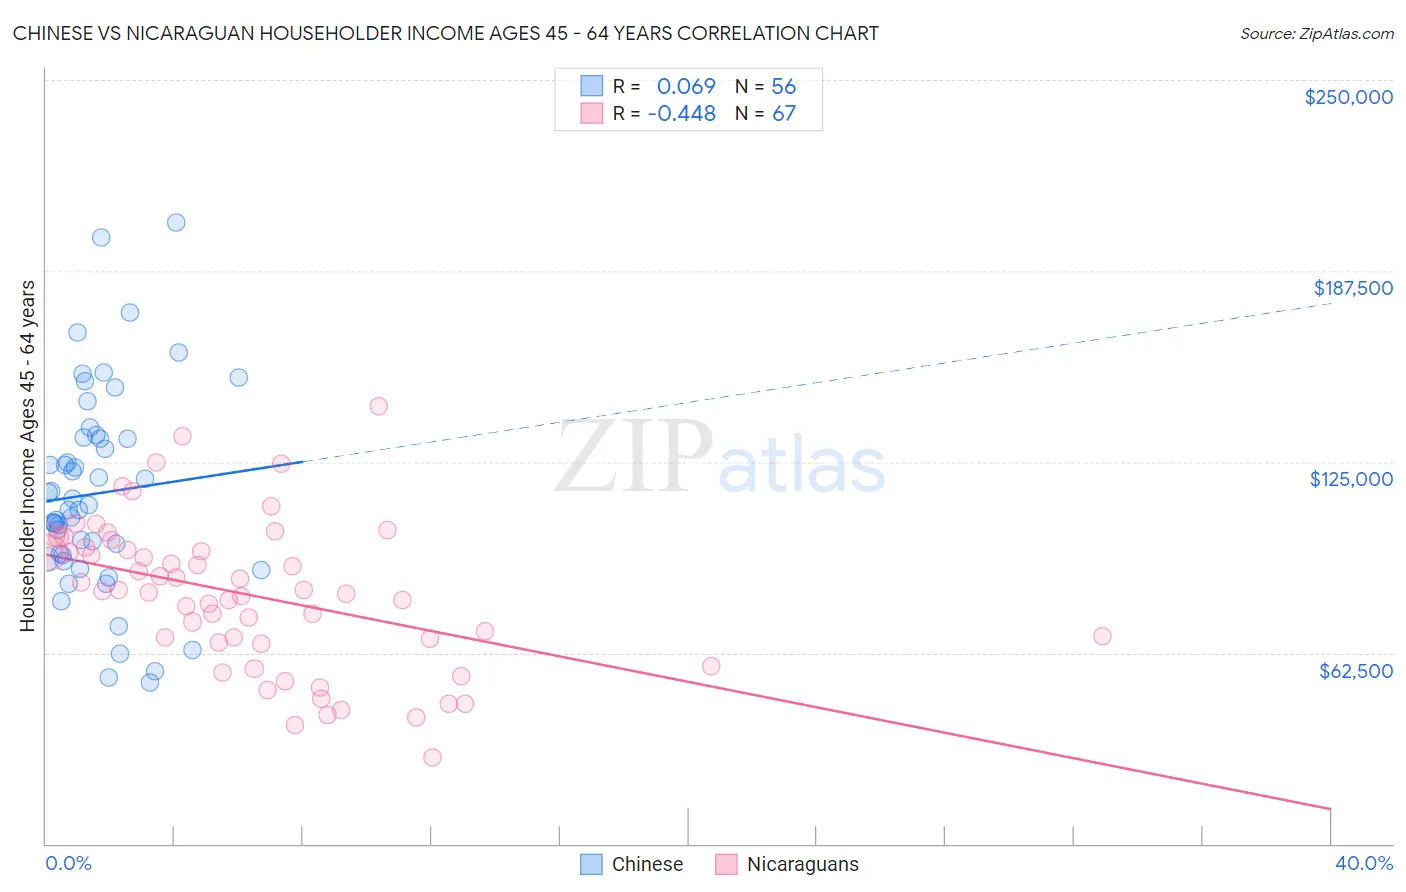 Chinese vs Nicaraguan Householder Income Ages 45 - 64 years